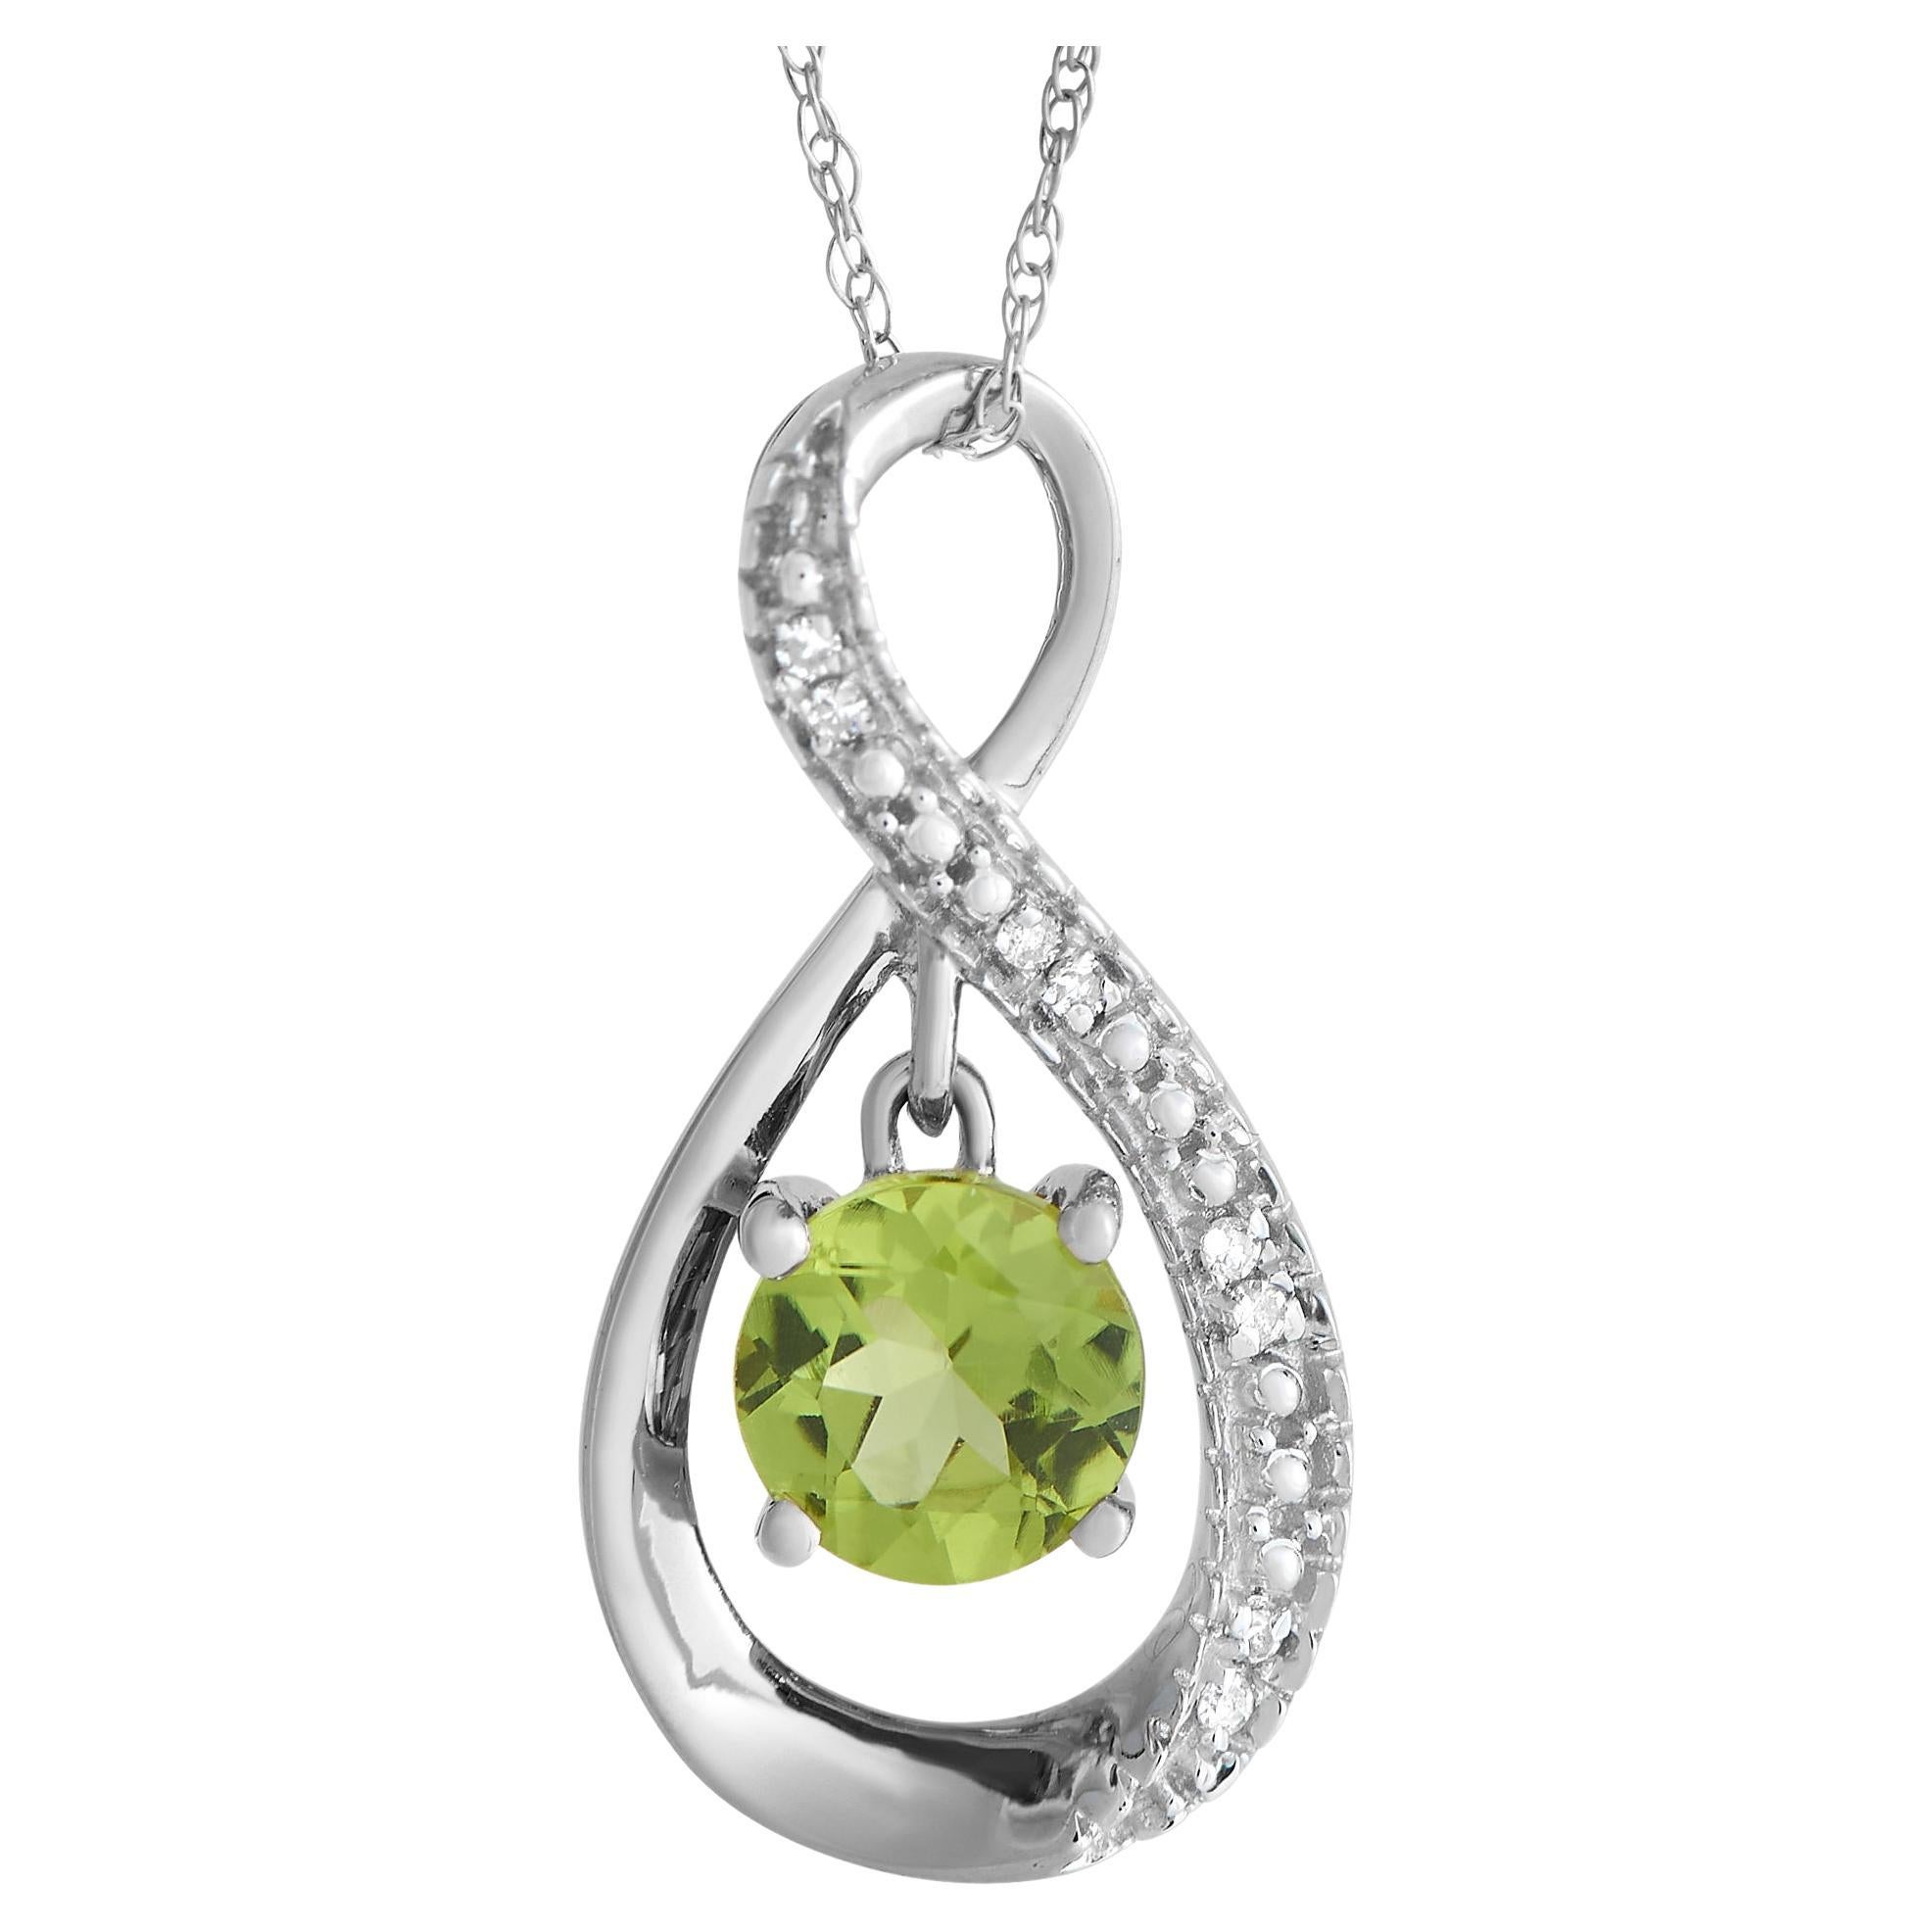 LB Exclusive 14K White Gold 0.03ct Diamond and Peridot Necklace